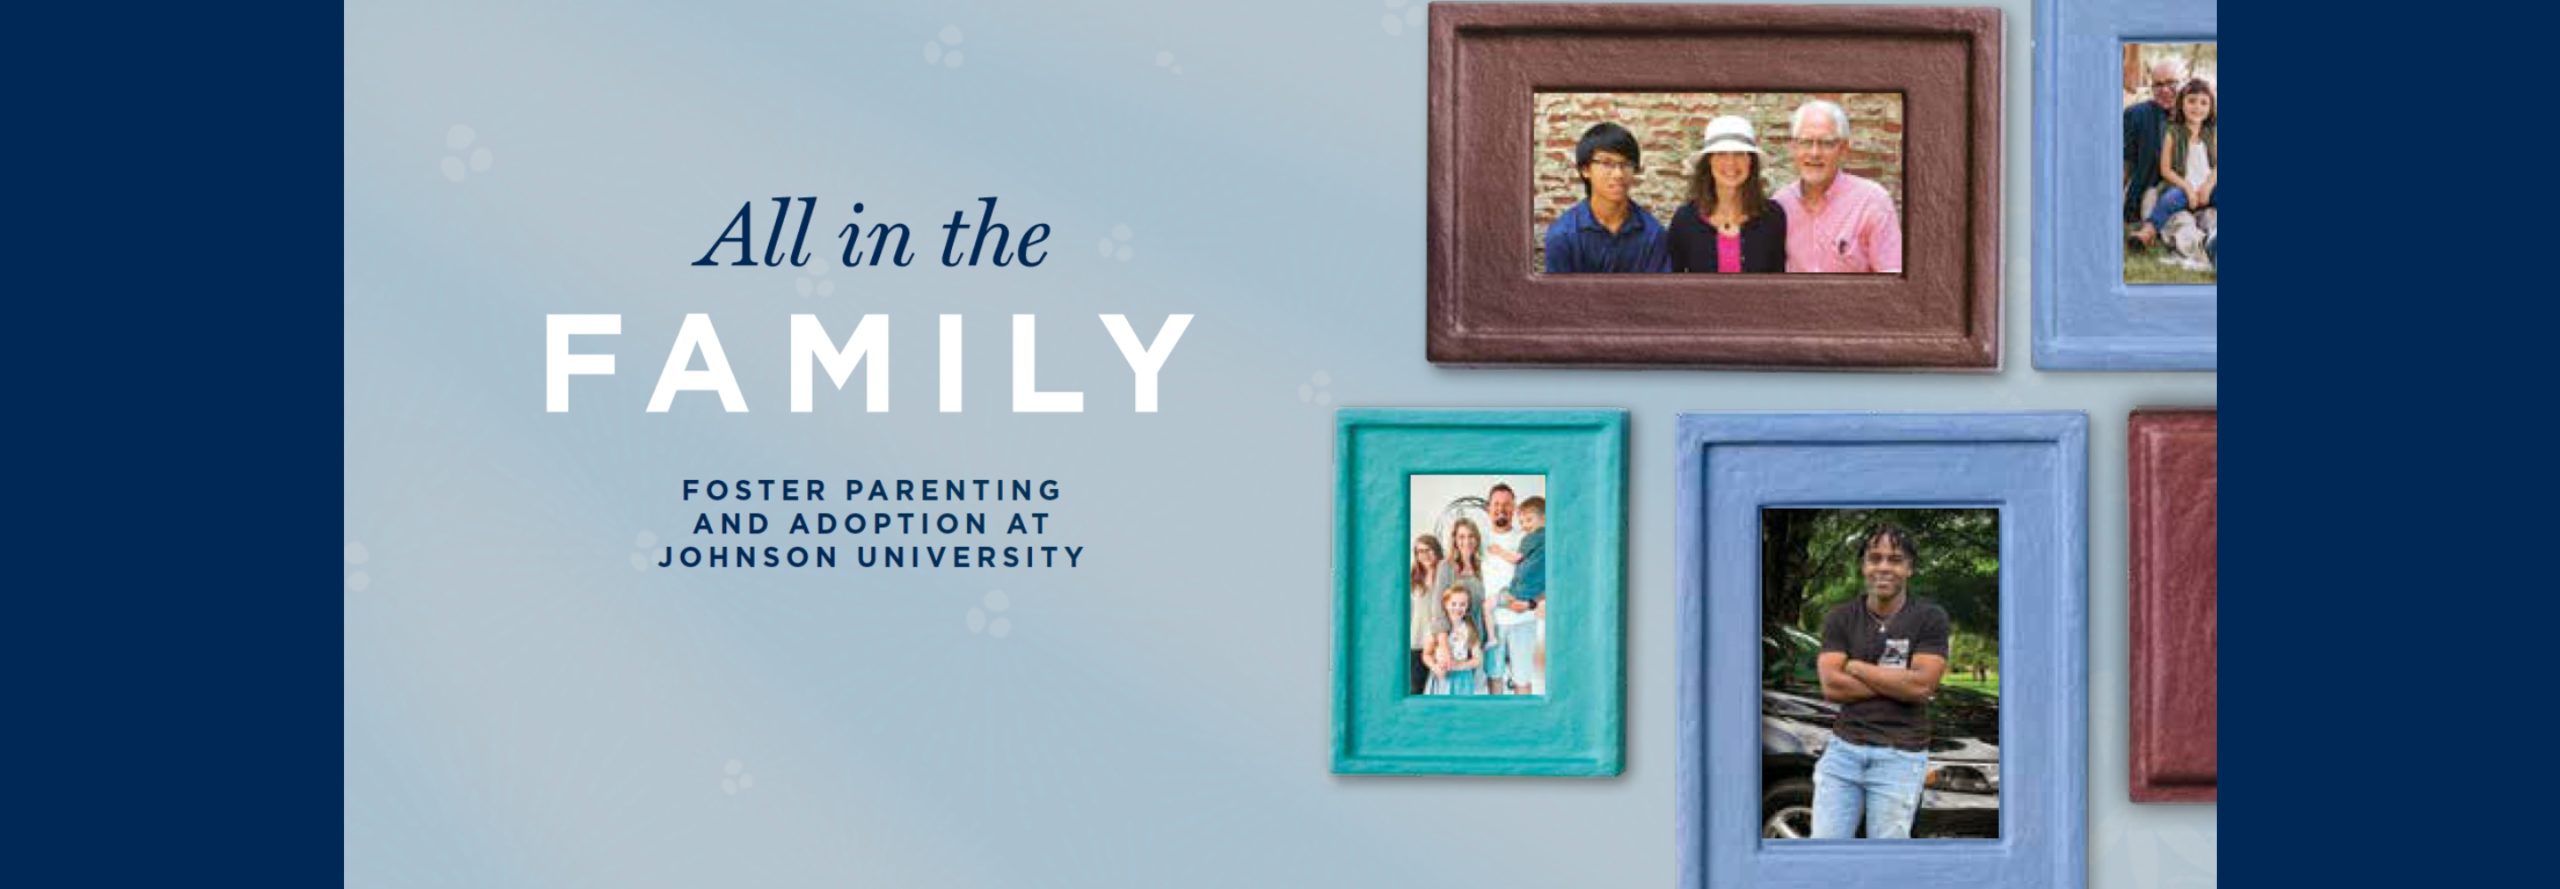 All in the Family: Foster Parenting and Adoption at Johnson University